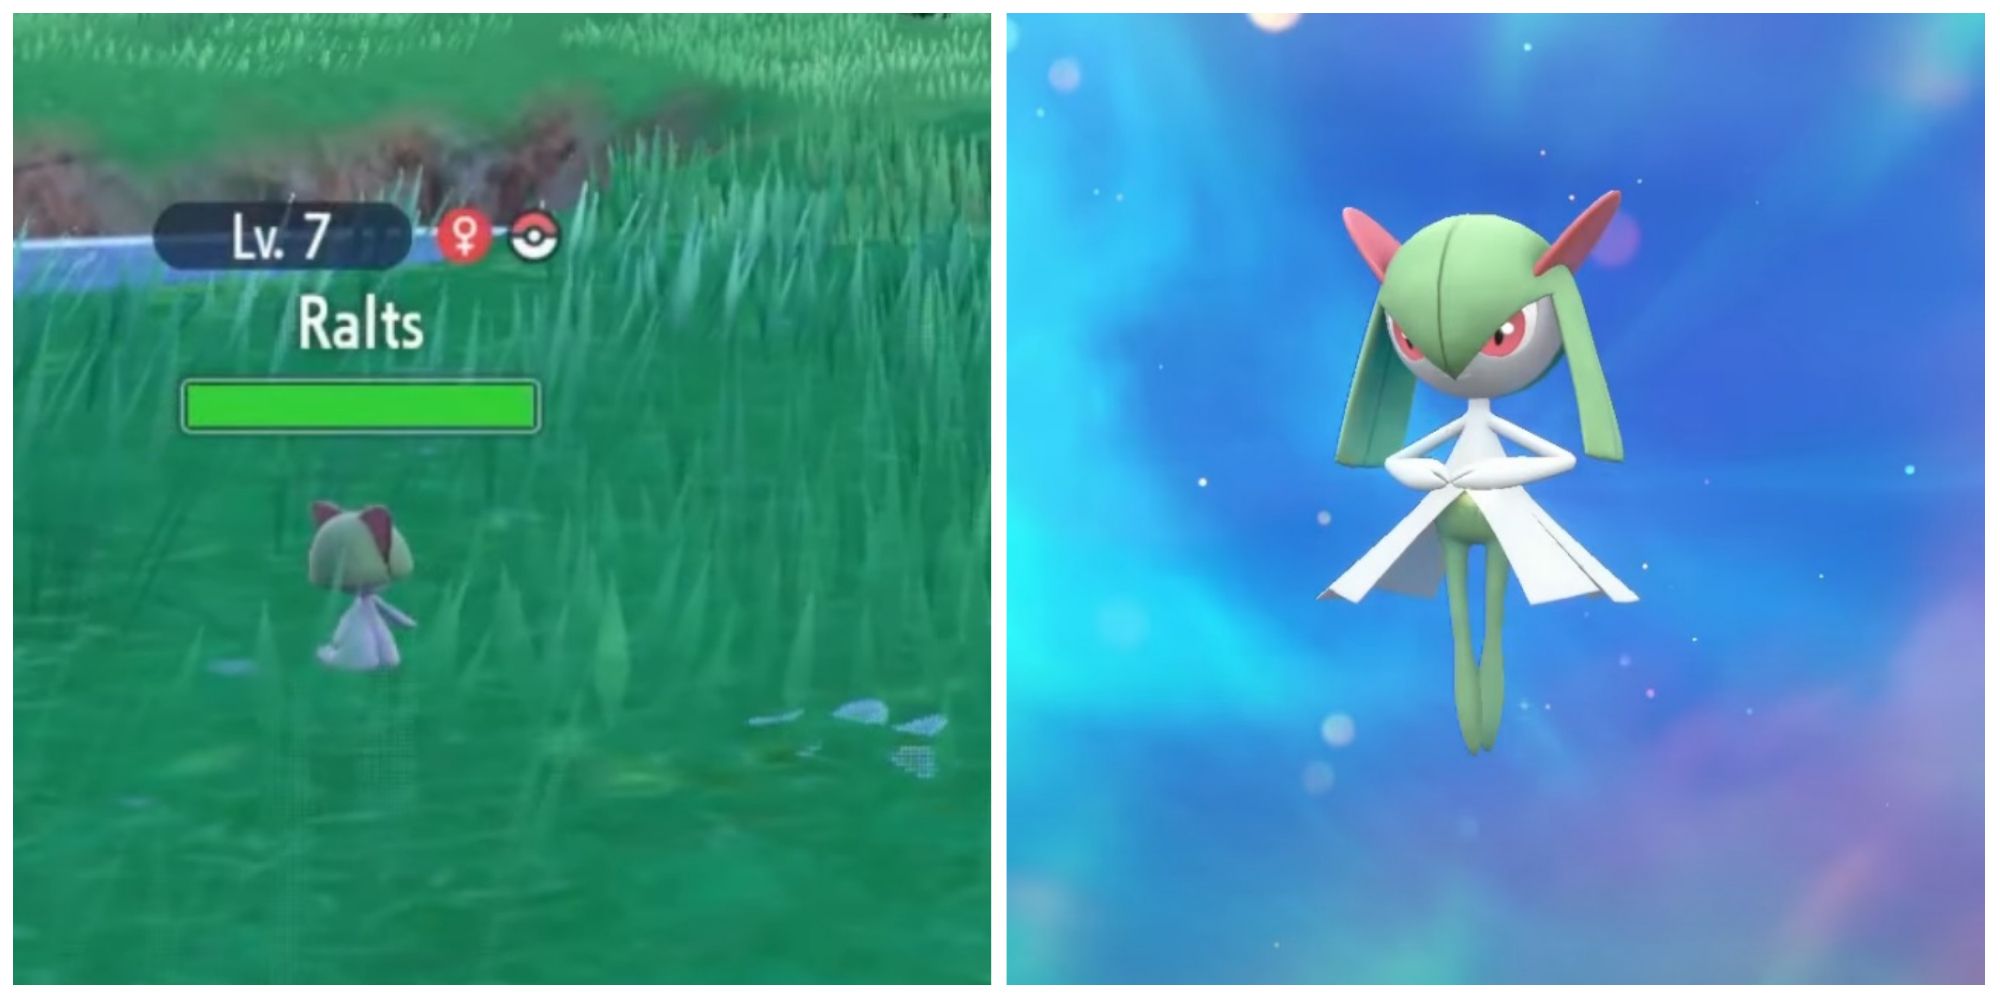 How to EASILY SHINY Hunt Ralts and Gardevior in Pokemon Scarlet